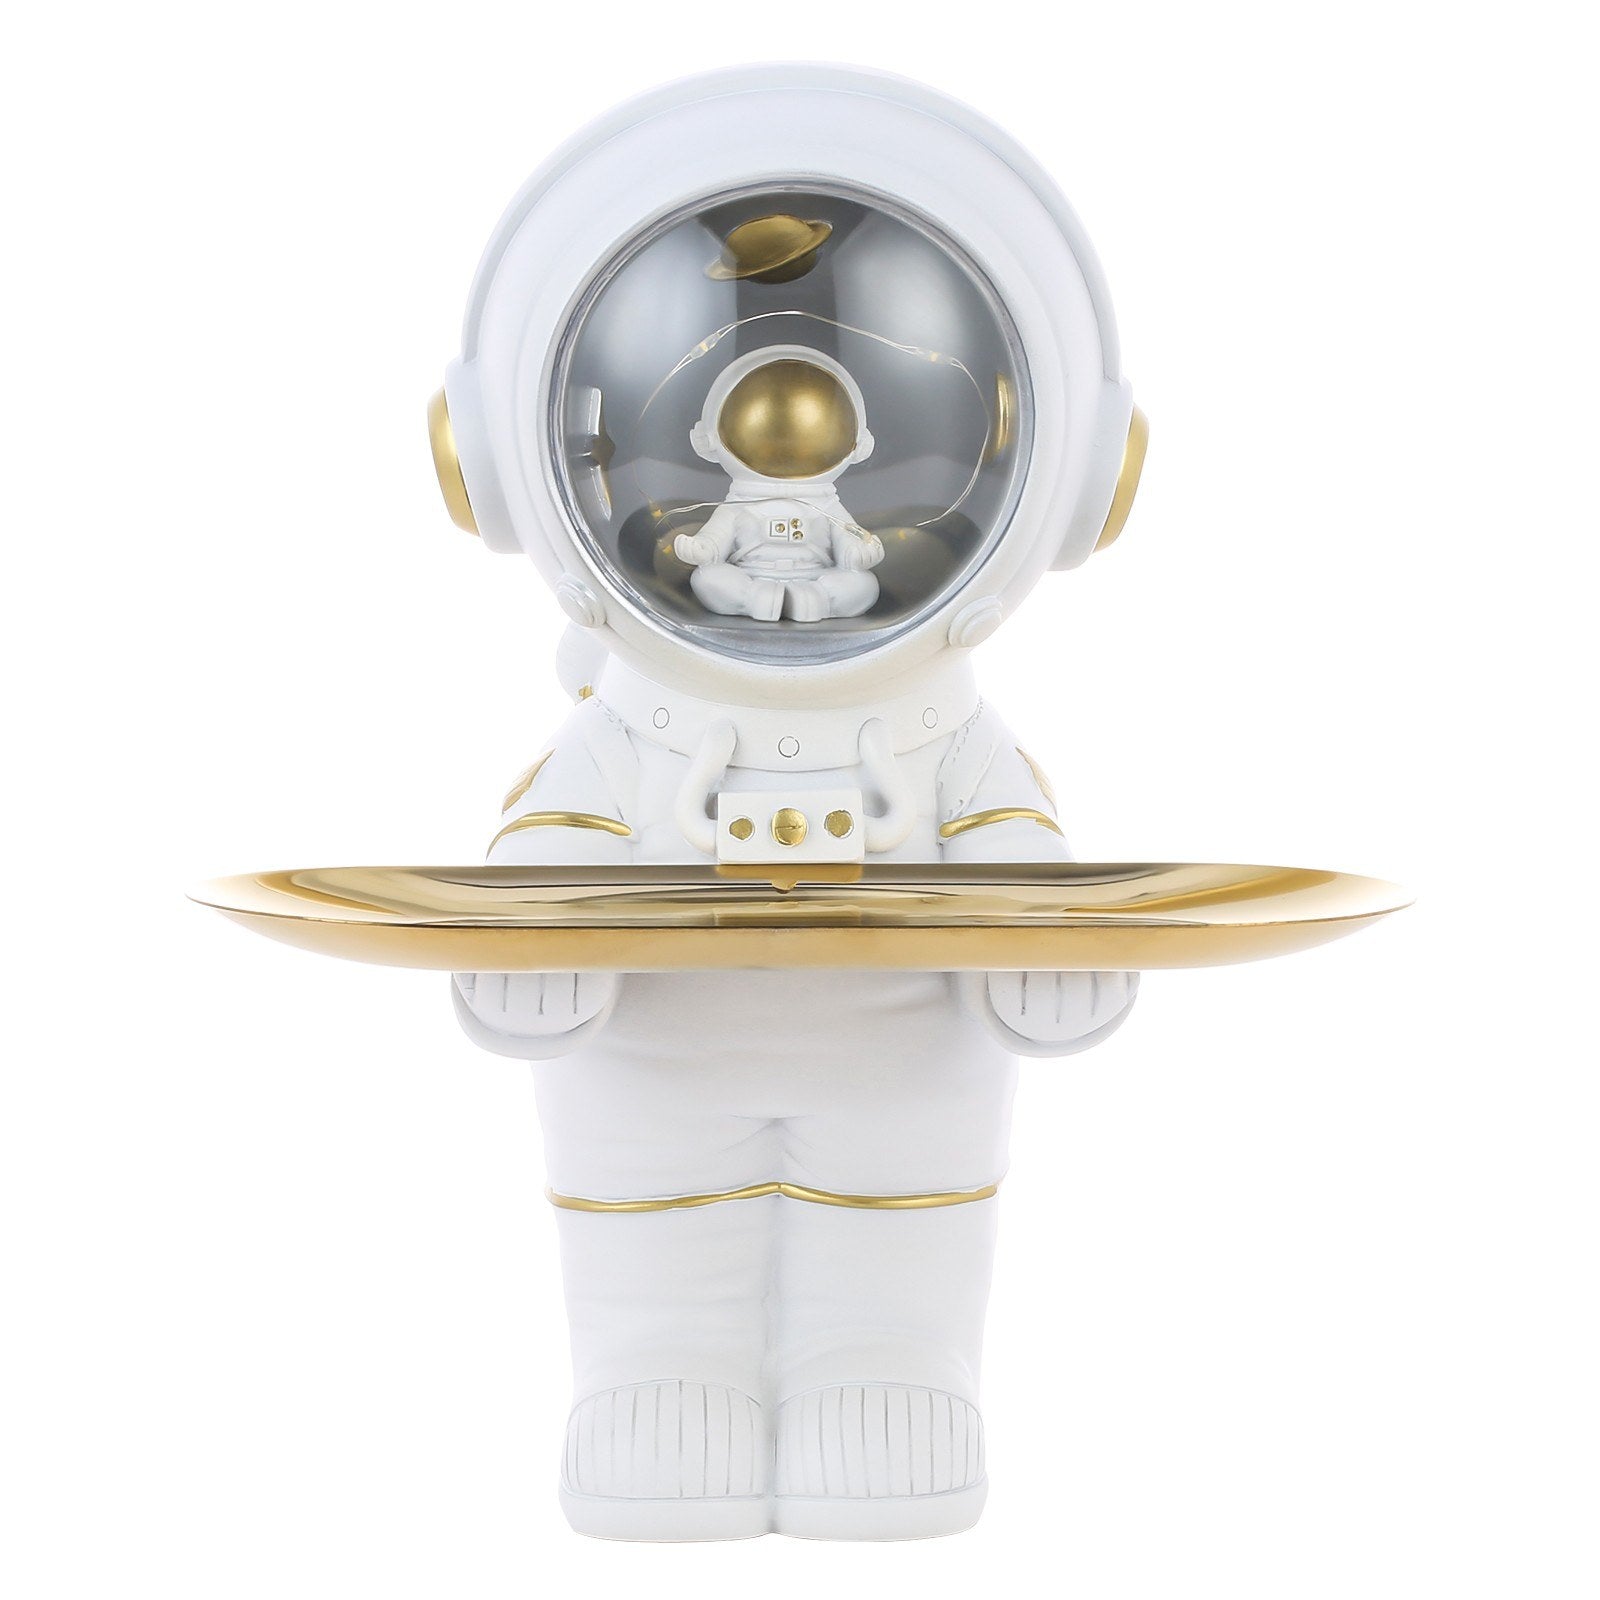 Give the gift of an astronaut figurine to inspire your loved ones on their journey through space, mars and cosmos